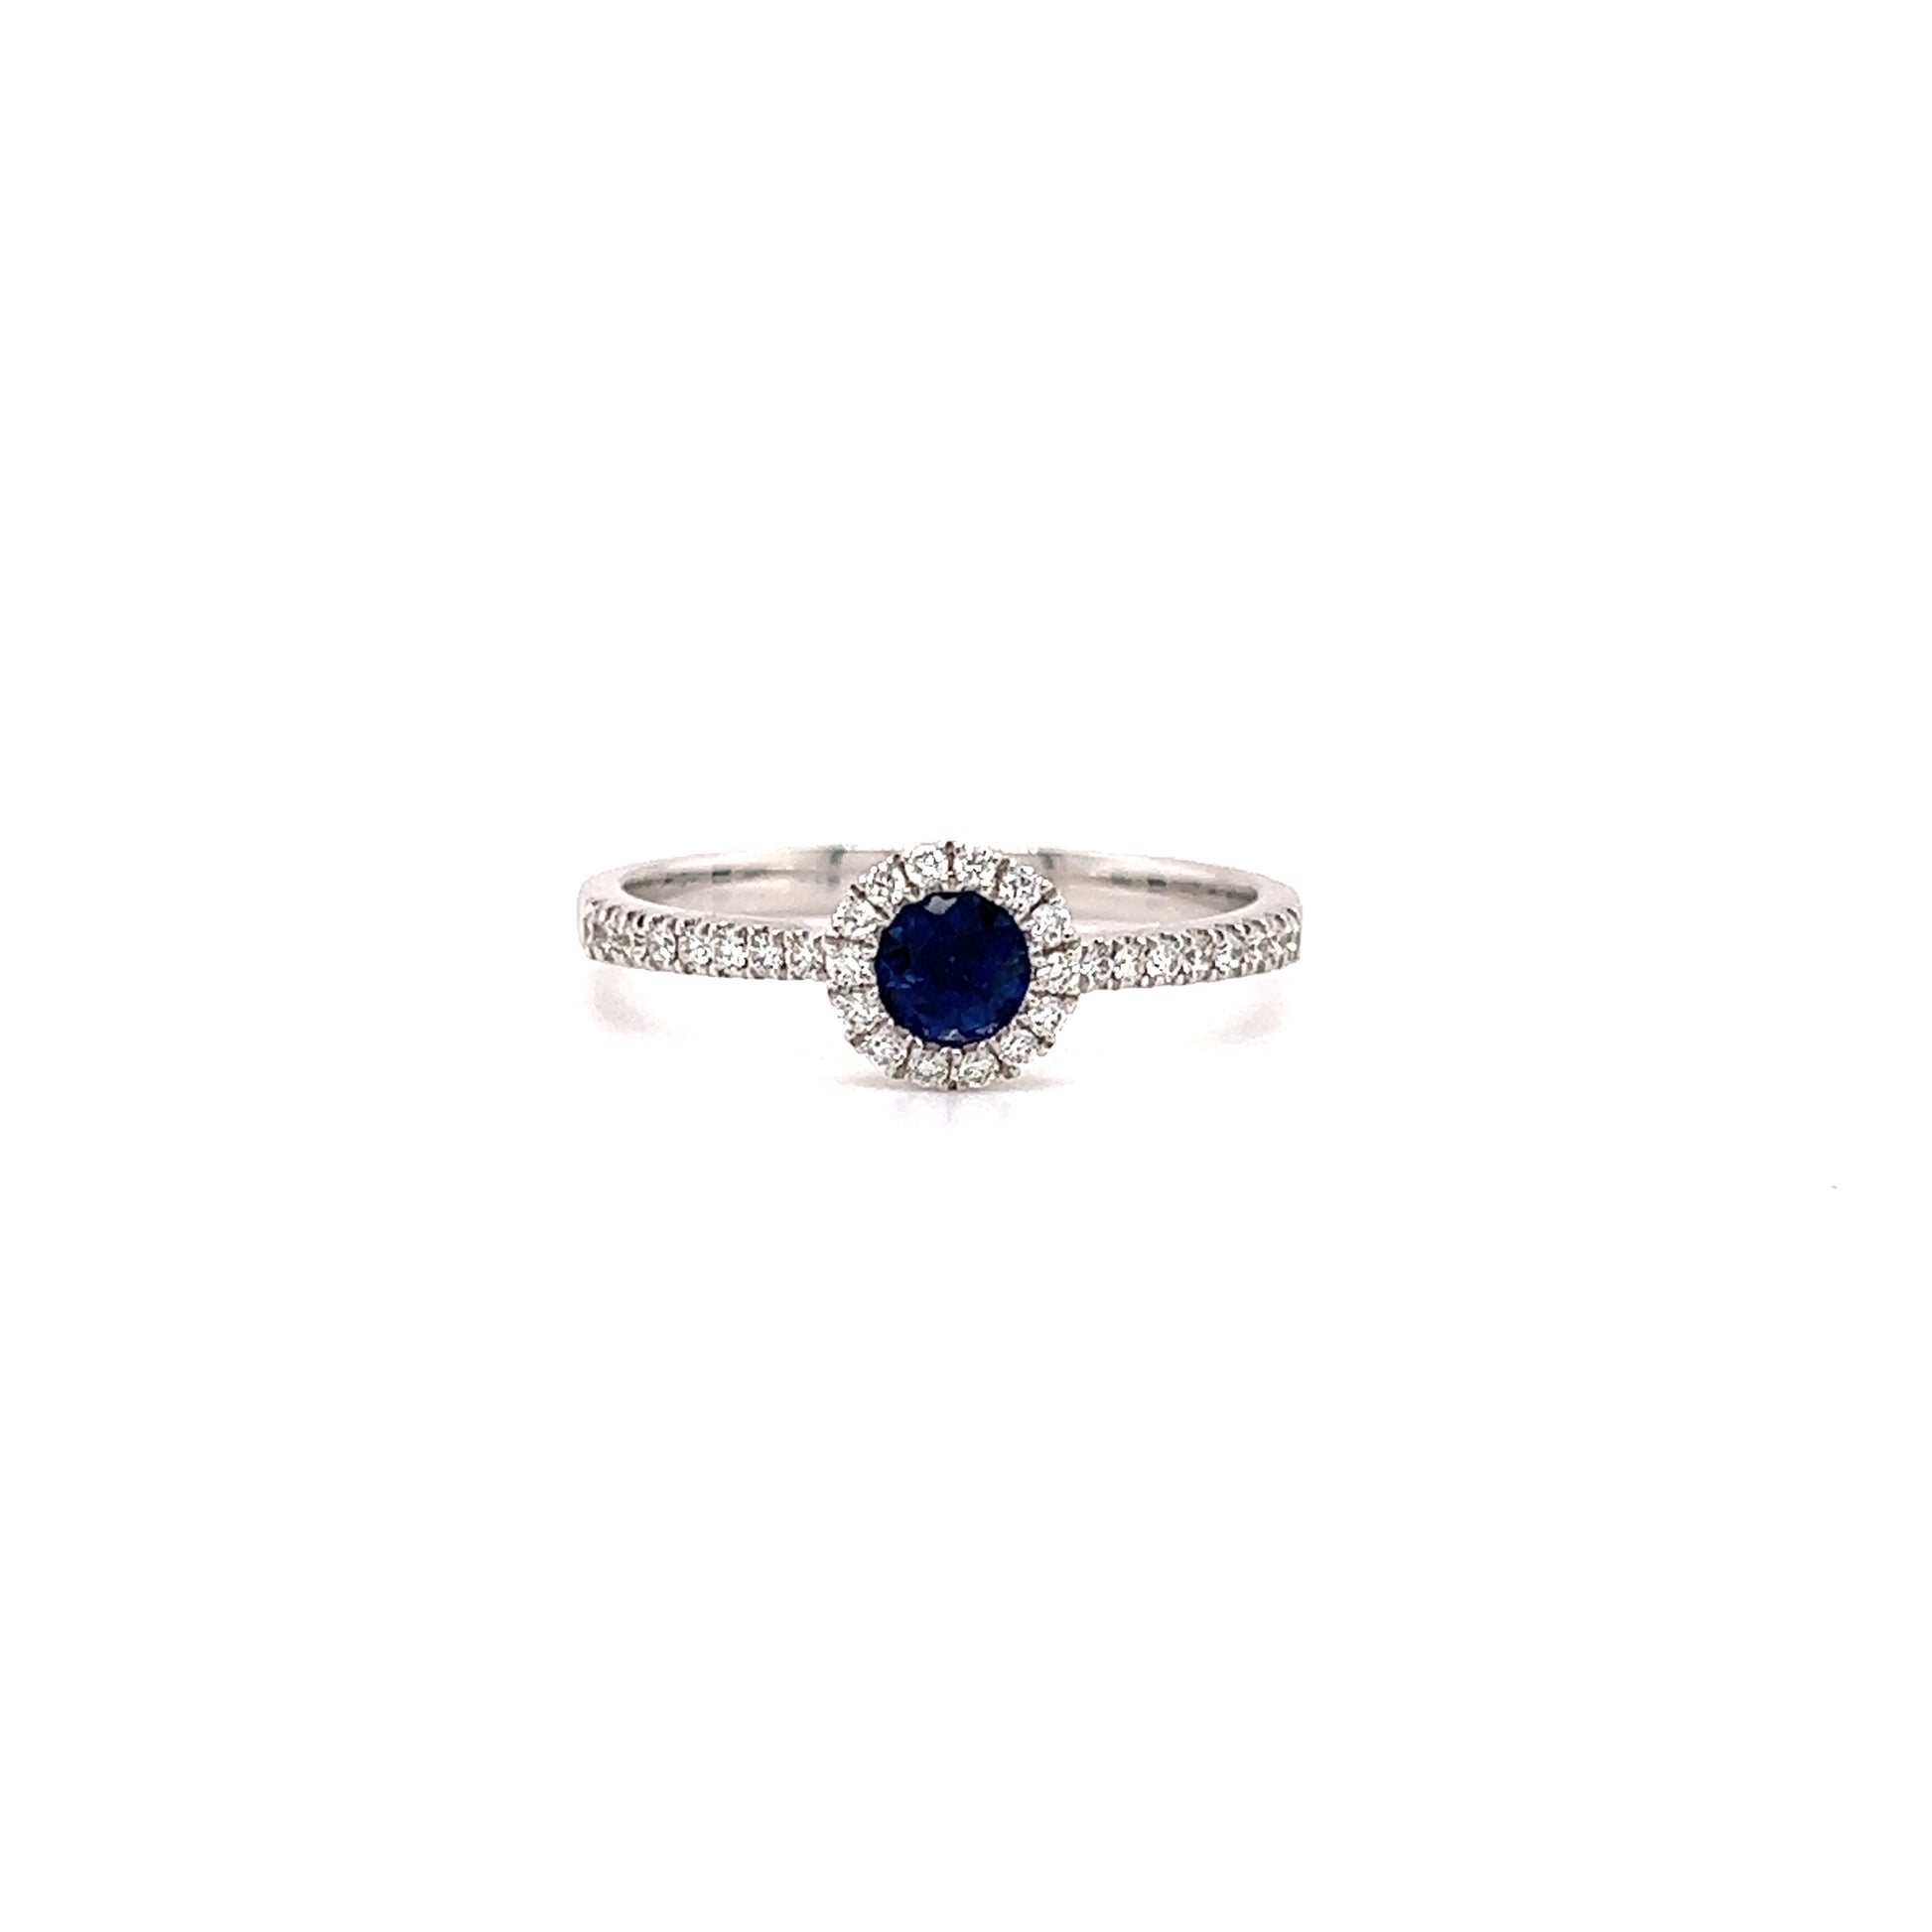 Sapphire Bezel Ring with Diamond Halo in 14K While Gold Front View